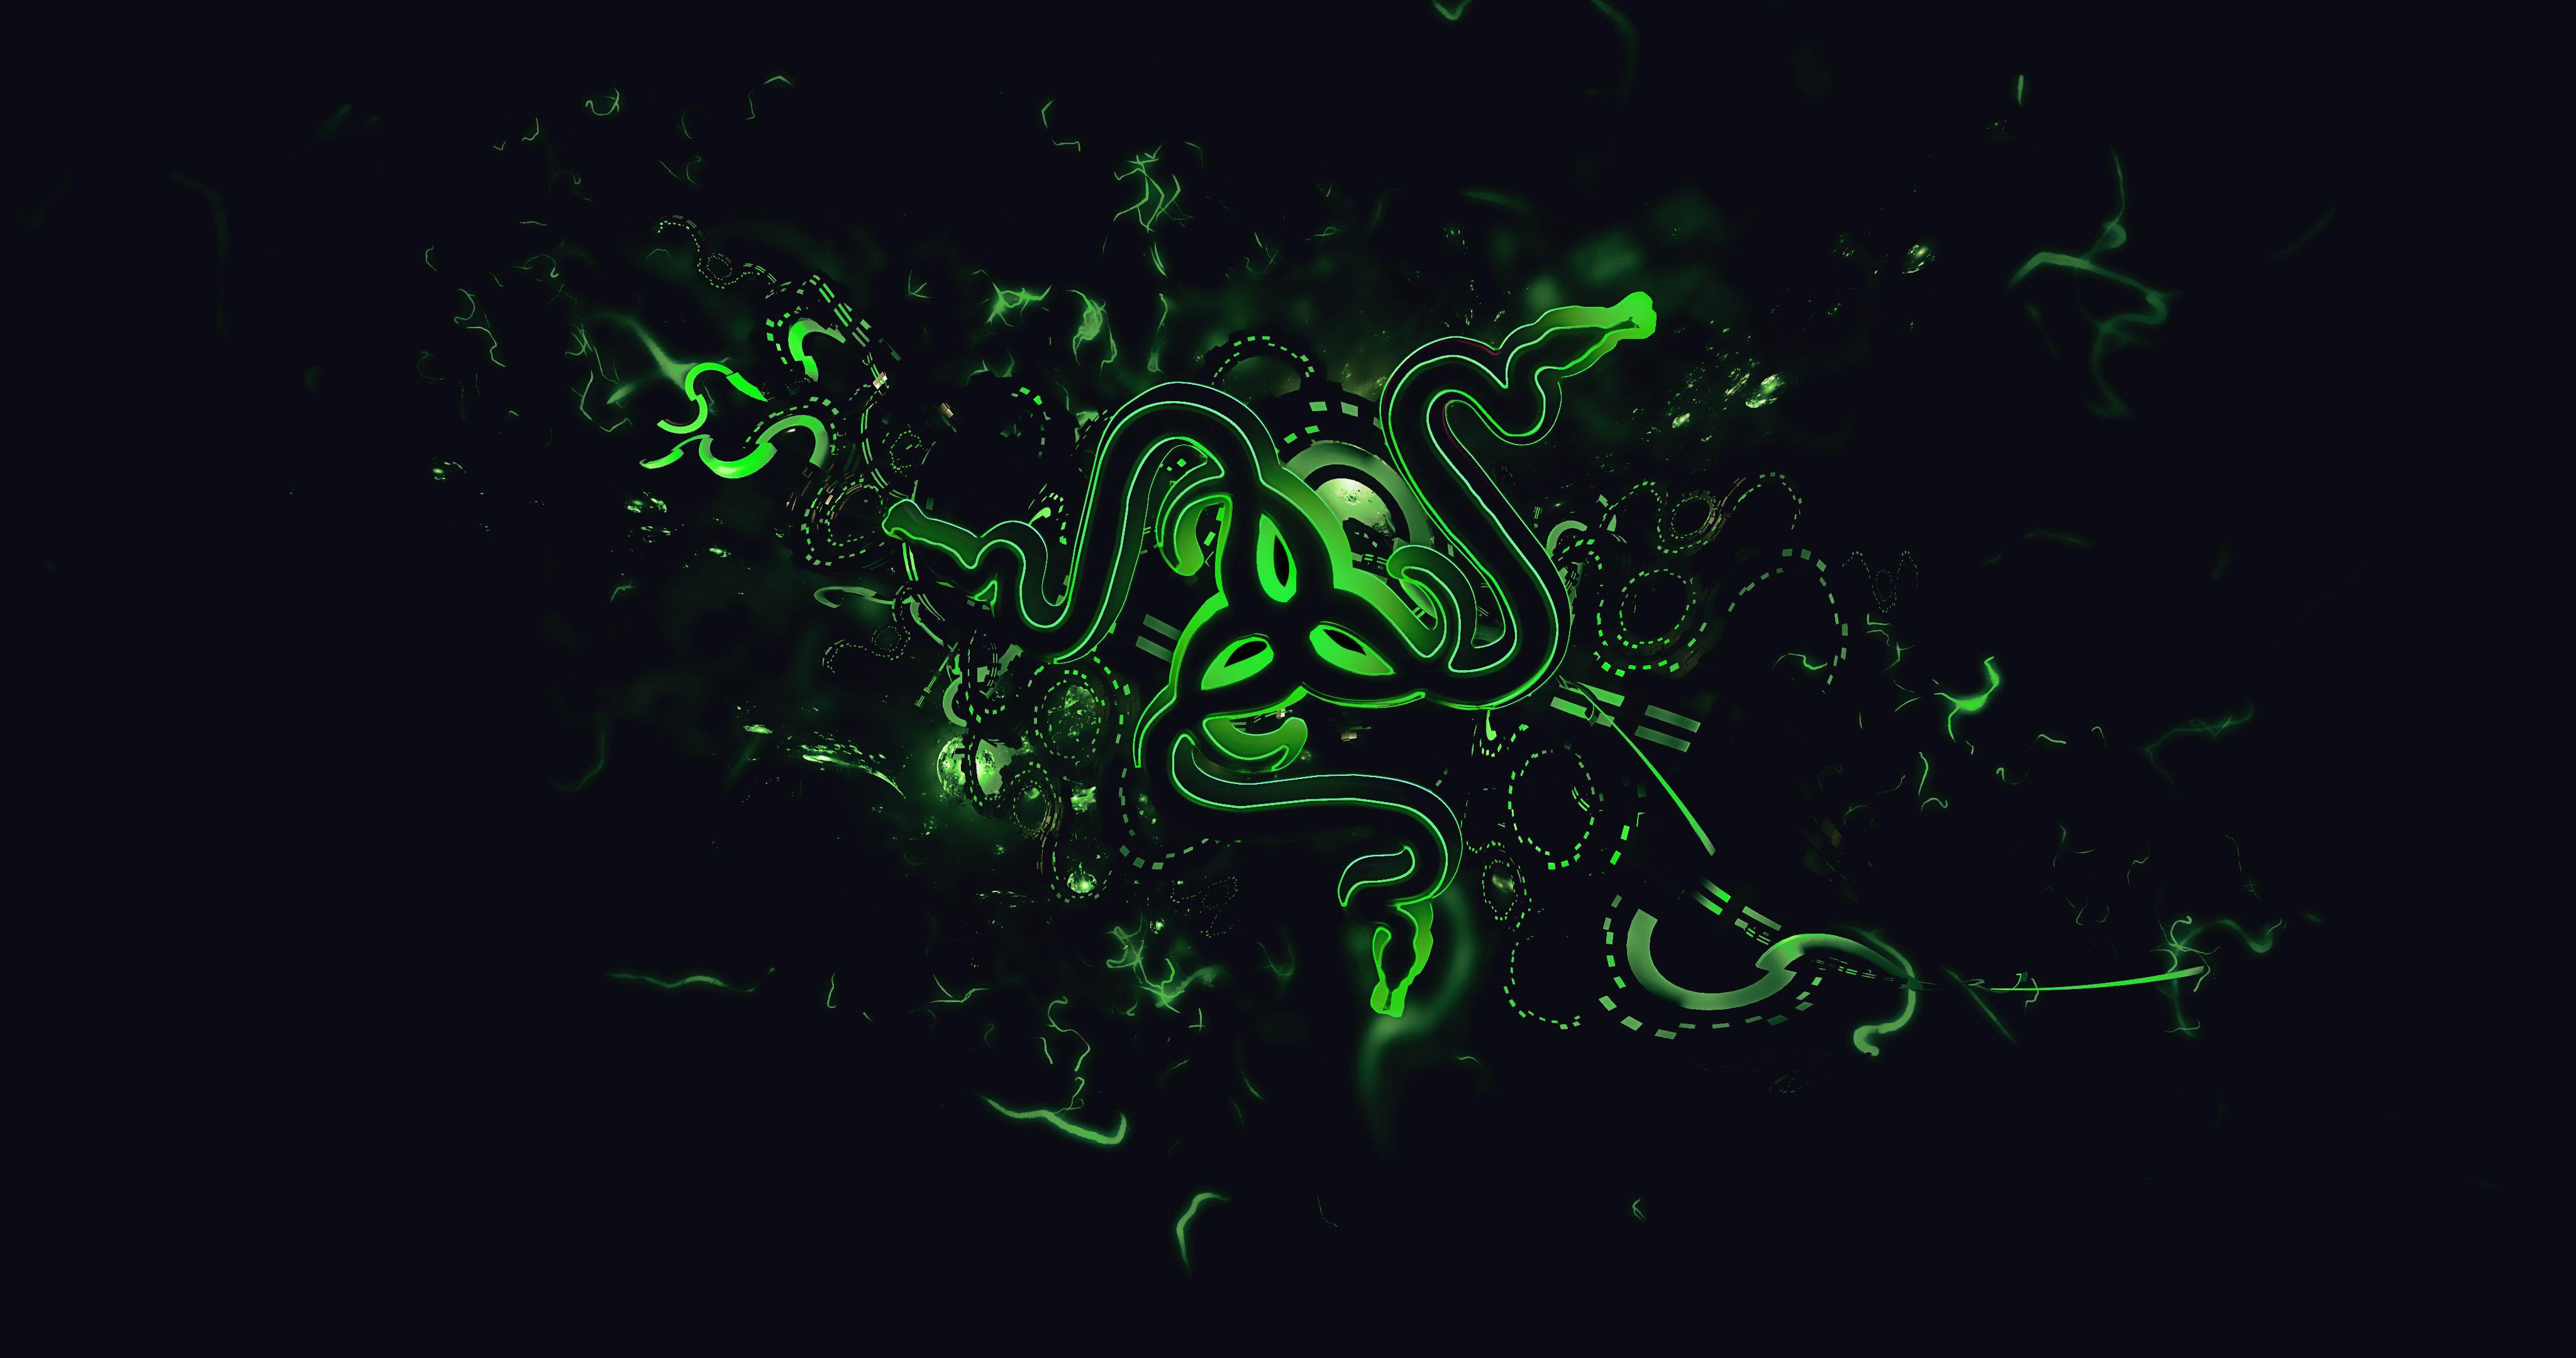 Razer 4k Wallpapers Wallpaper Cave We hope you enjoy our growing collection of hd images to use as a. razer 4k wallpapers wallpaper cave